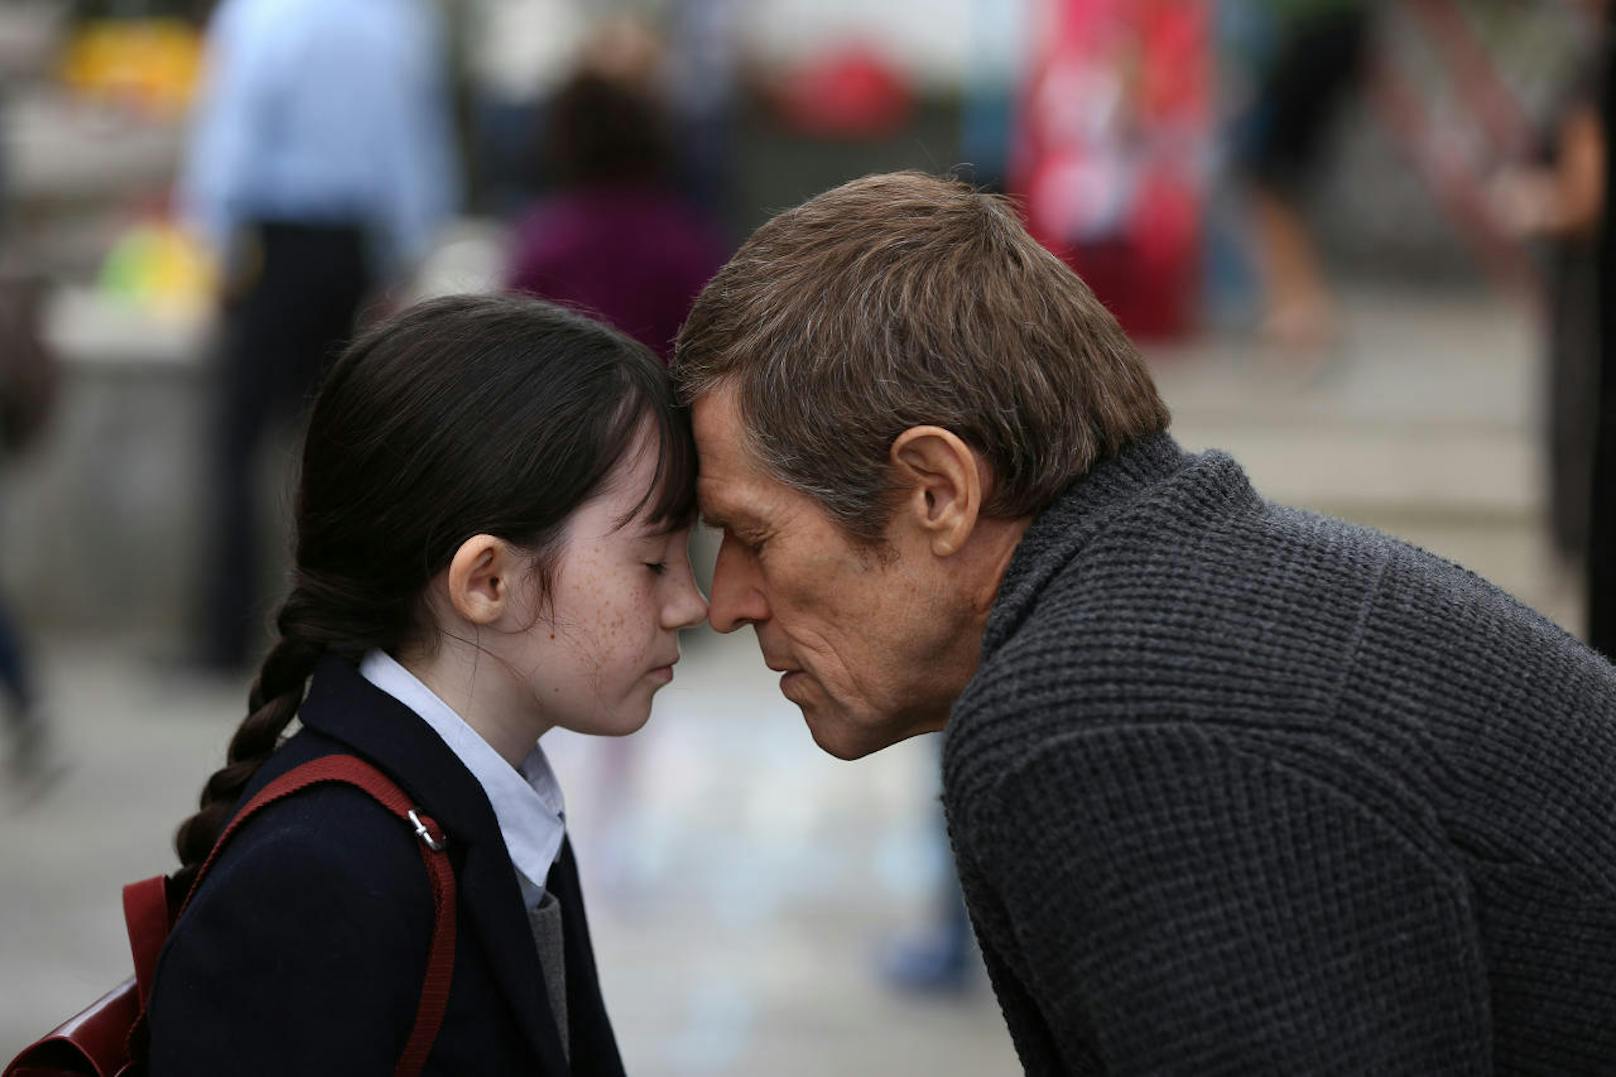 "What happened to Monday?": Willem Defoe